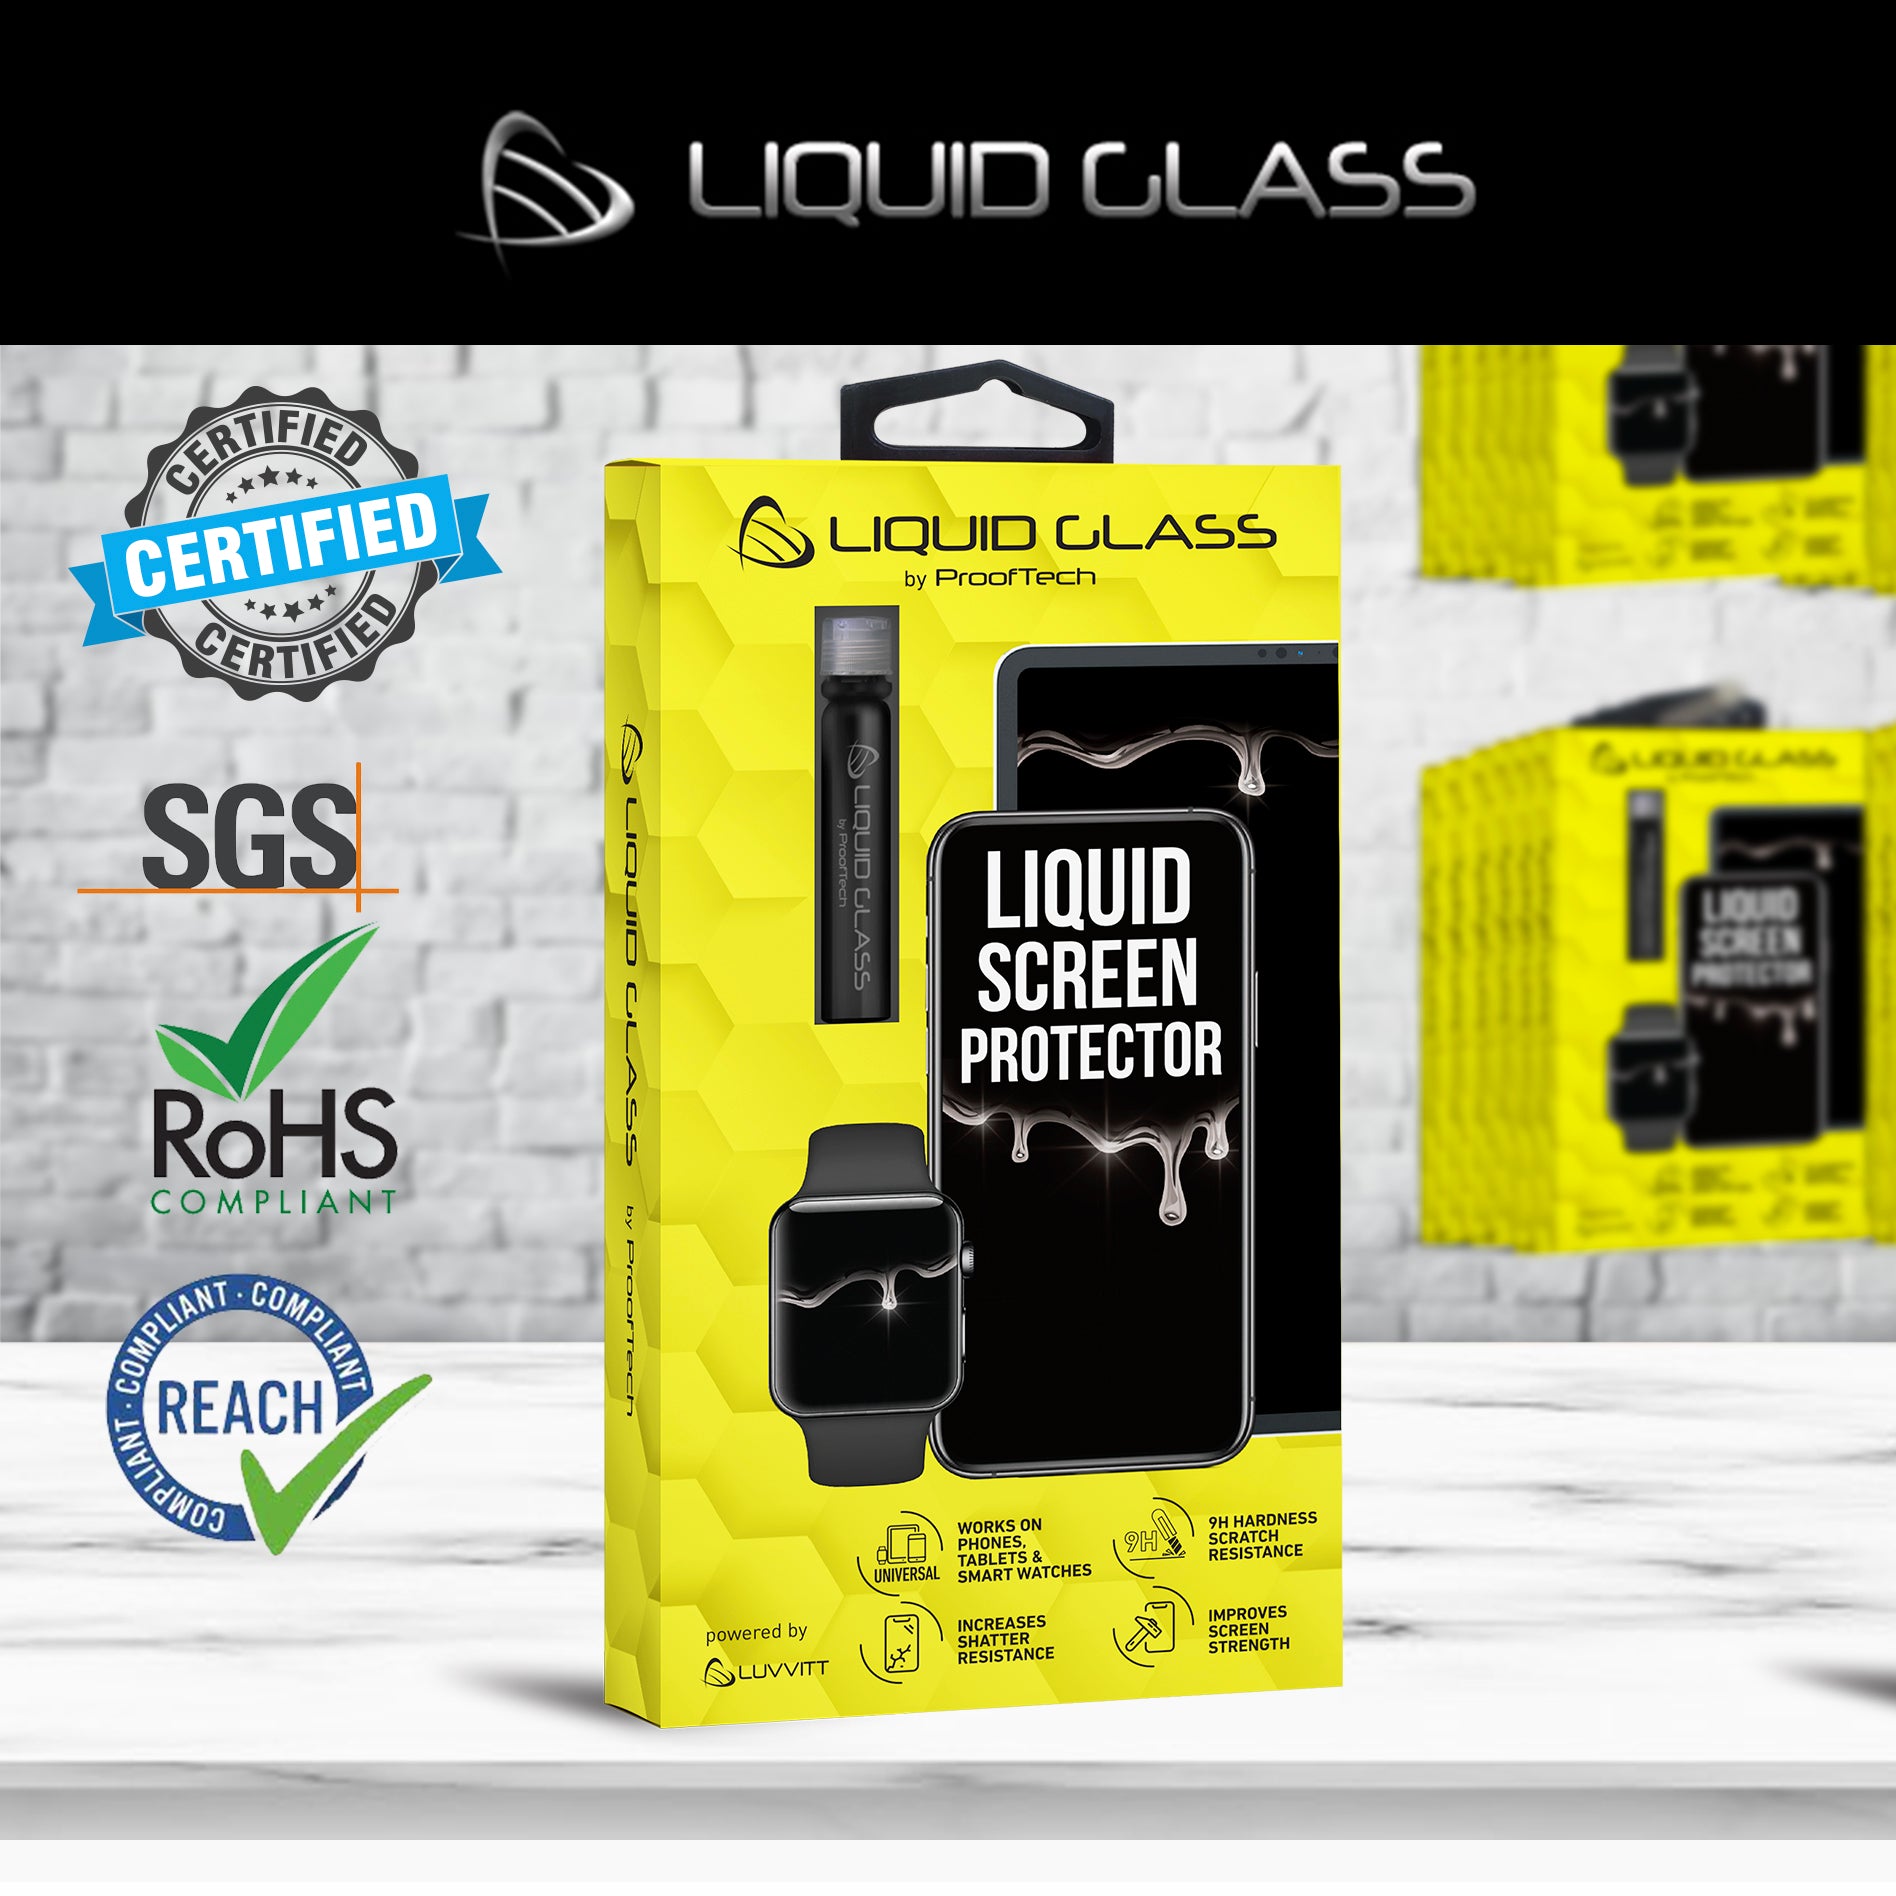 Liquid Glass Screen Protector Universal for All Phones Tablets Watches - 1 Pack